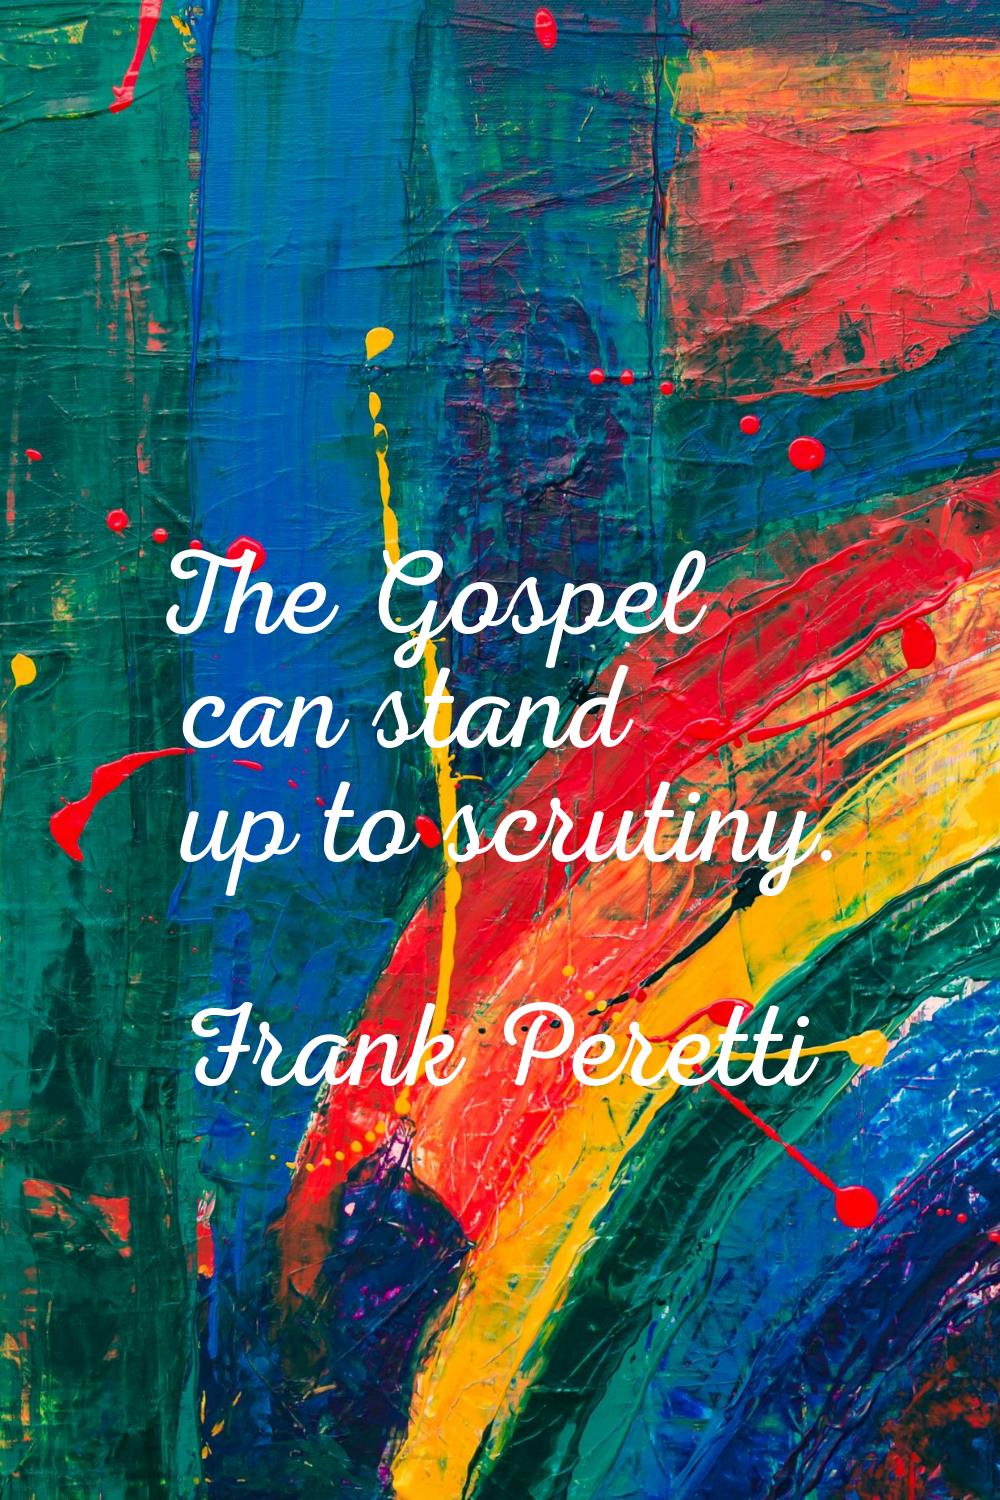 The Gospel can stand up to scrutiny.